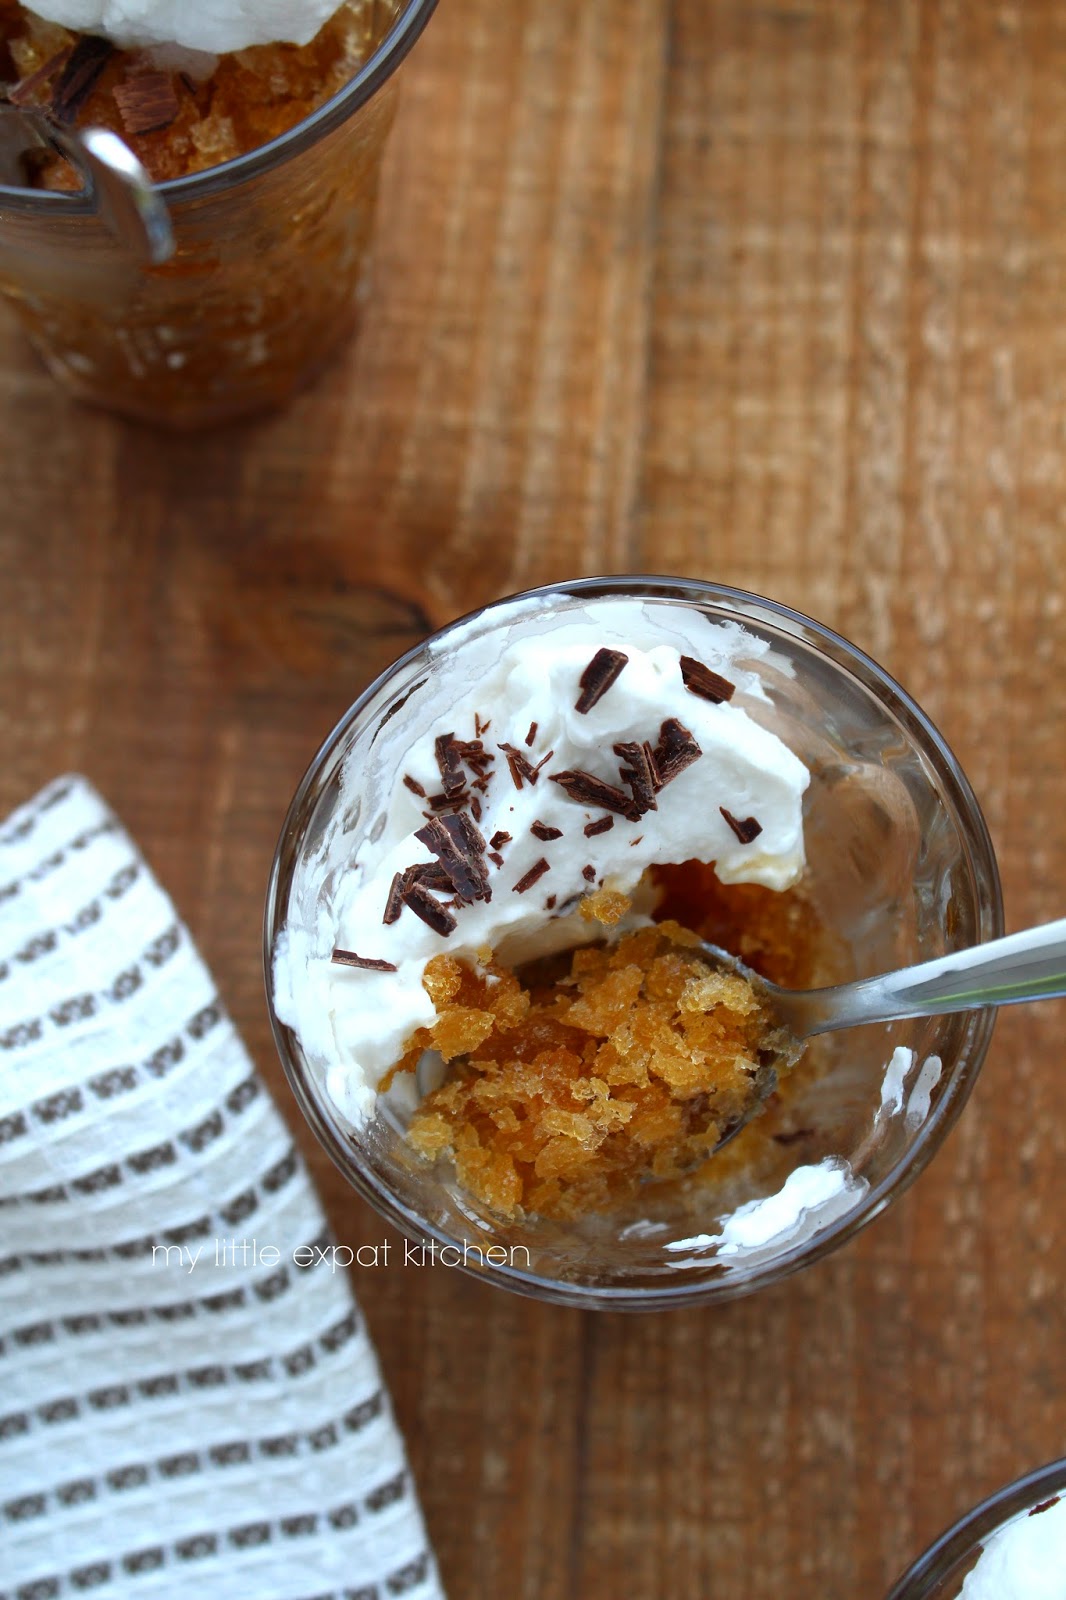 My Little Expat Kitchen: Coffee granita with coconut whipped cream